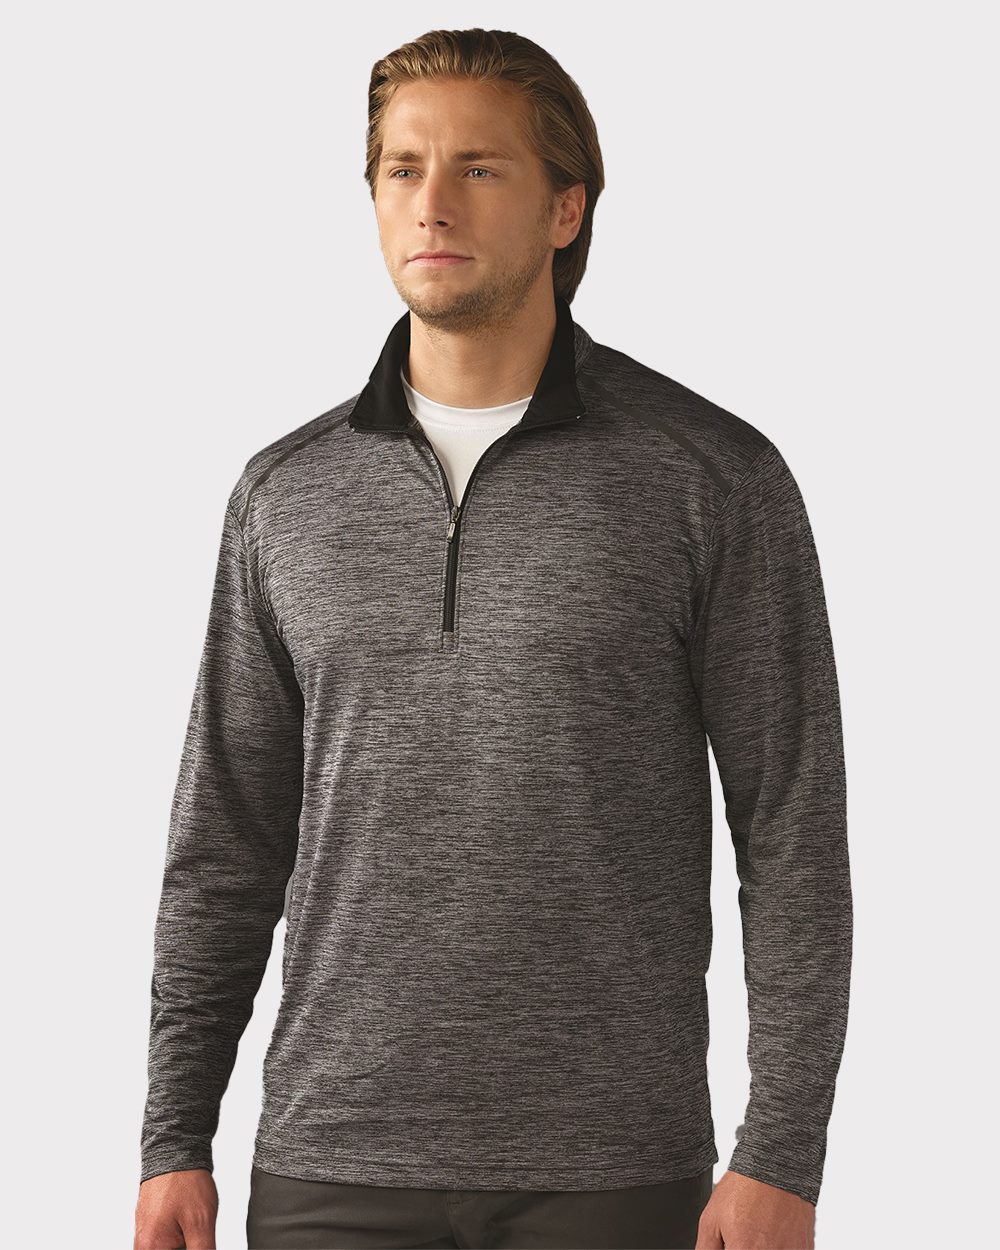 MOISTURE WICKING XS-3XL LONG SLEEVE 1/4 ZIP SOLID PULLOVER MEN'S CLASSIC 